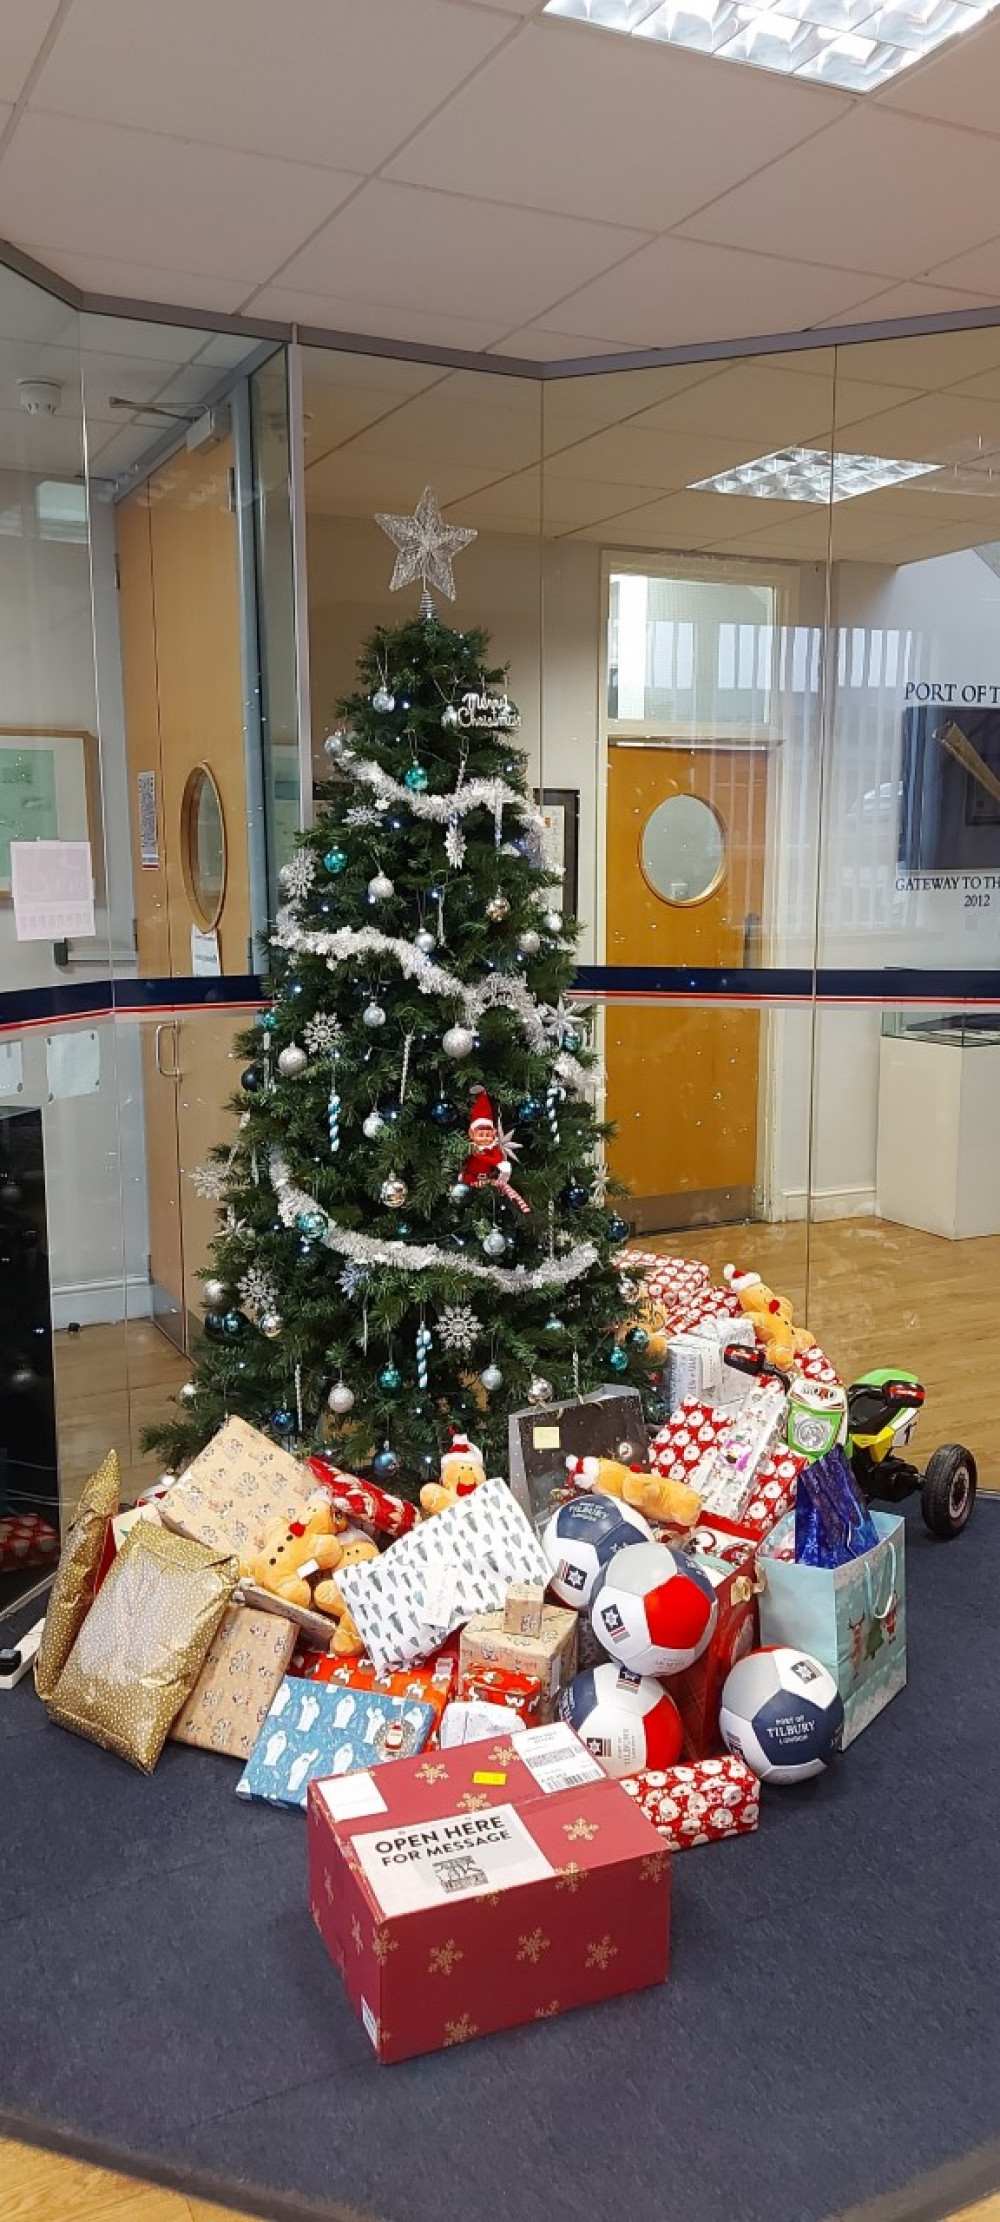 Presents under the tree at the Port of Tilbury’s port office before they were delivered to Changing Pathways.